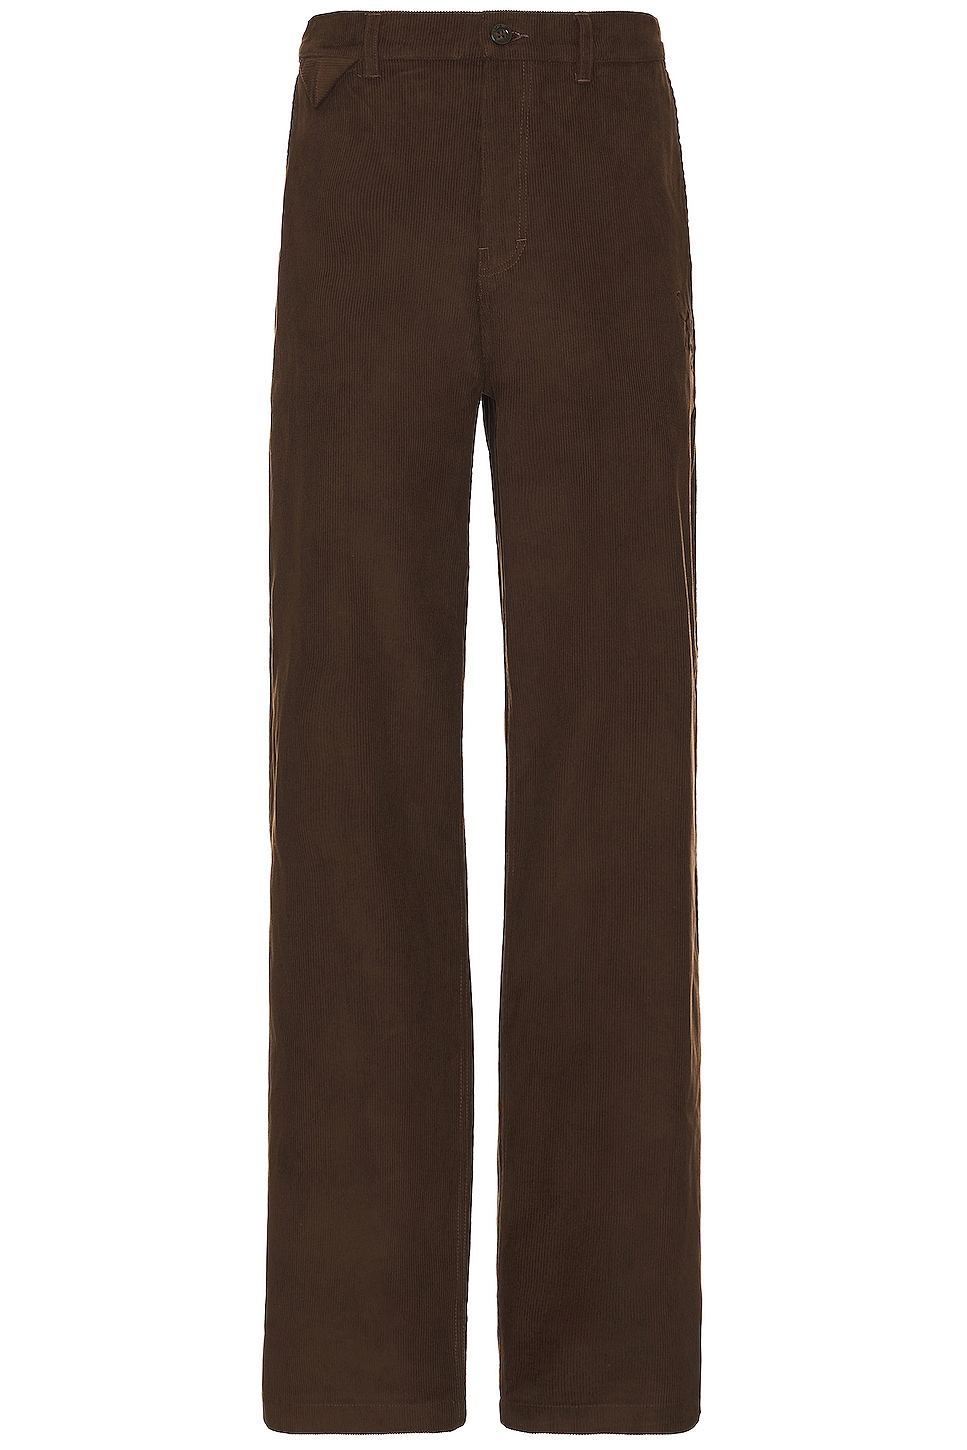 Image 1 of Honor The Gift Crease Pant in Brown